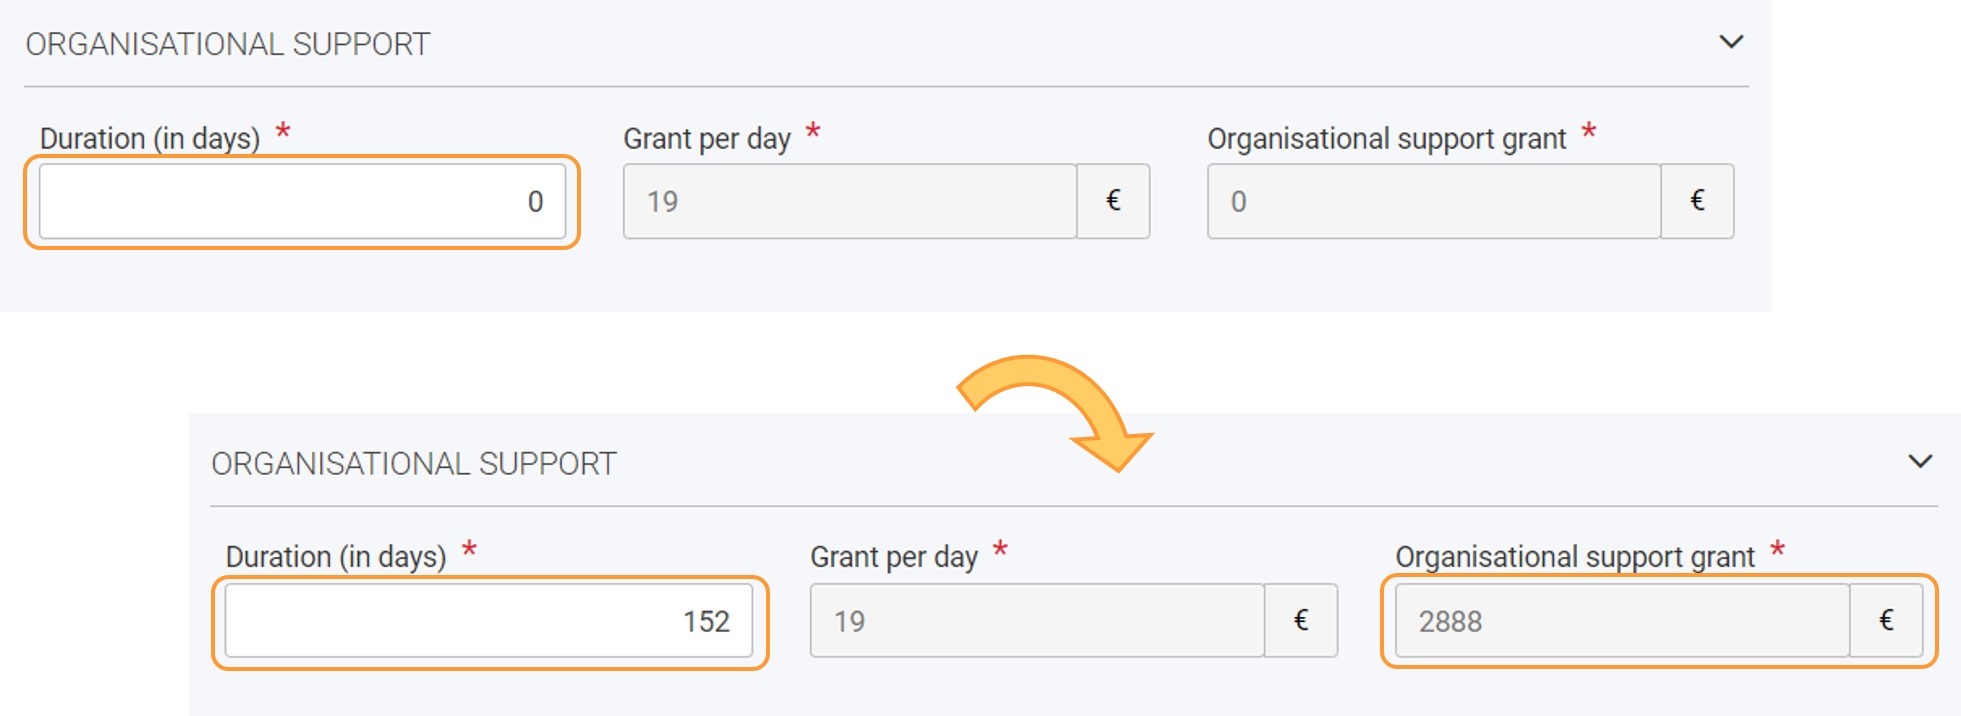 Example of Organisational Support section